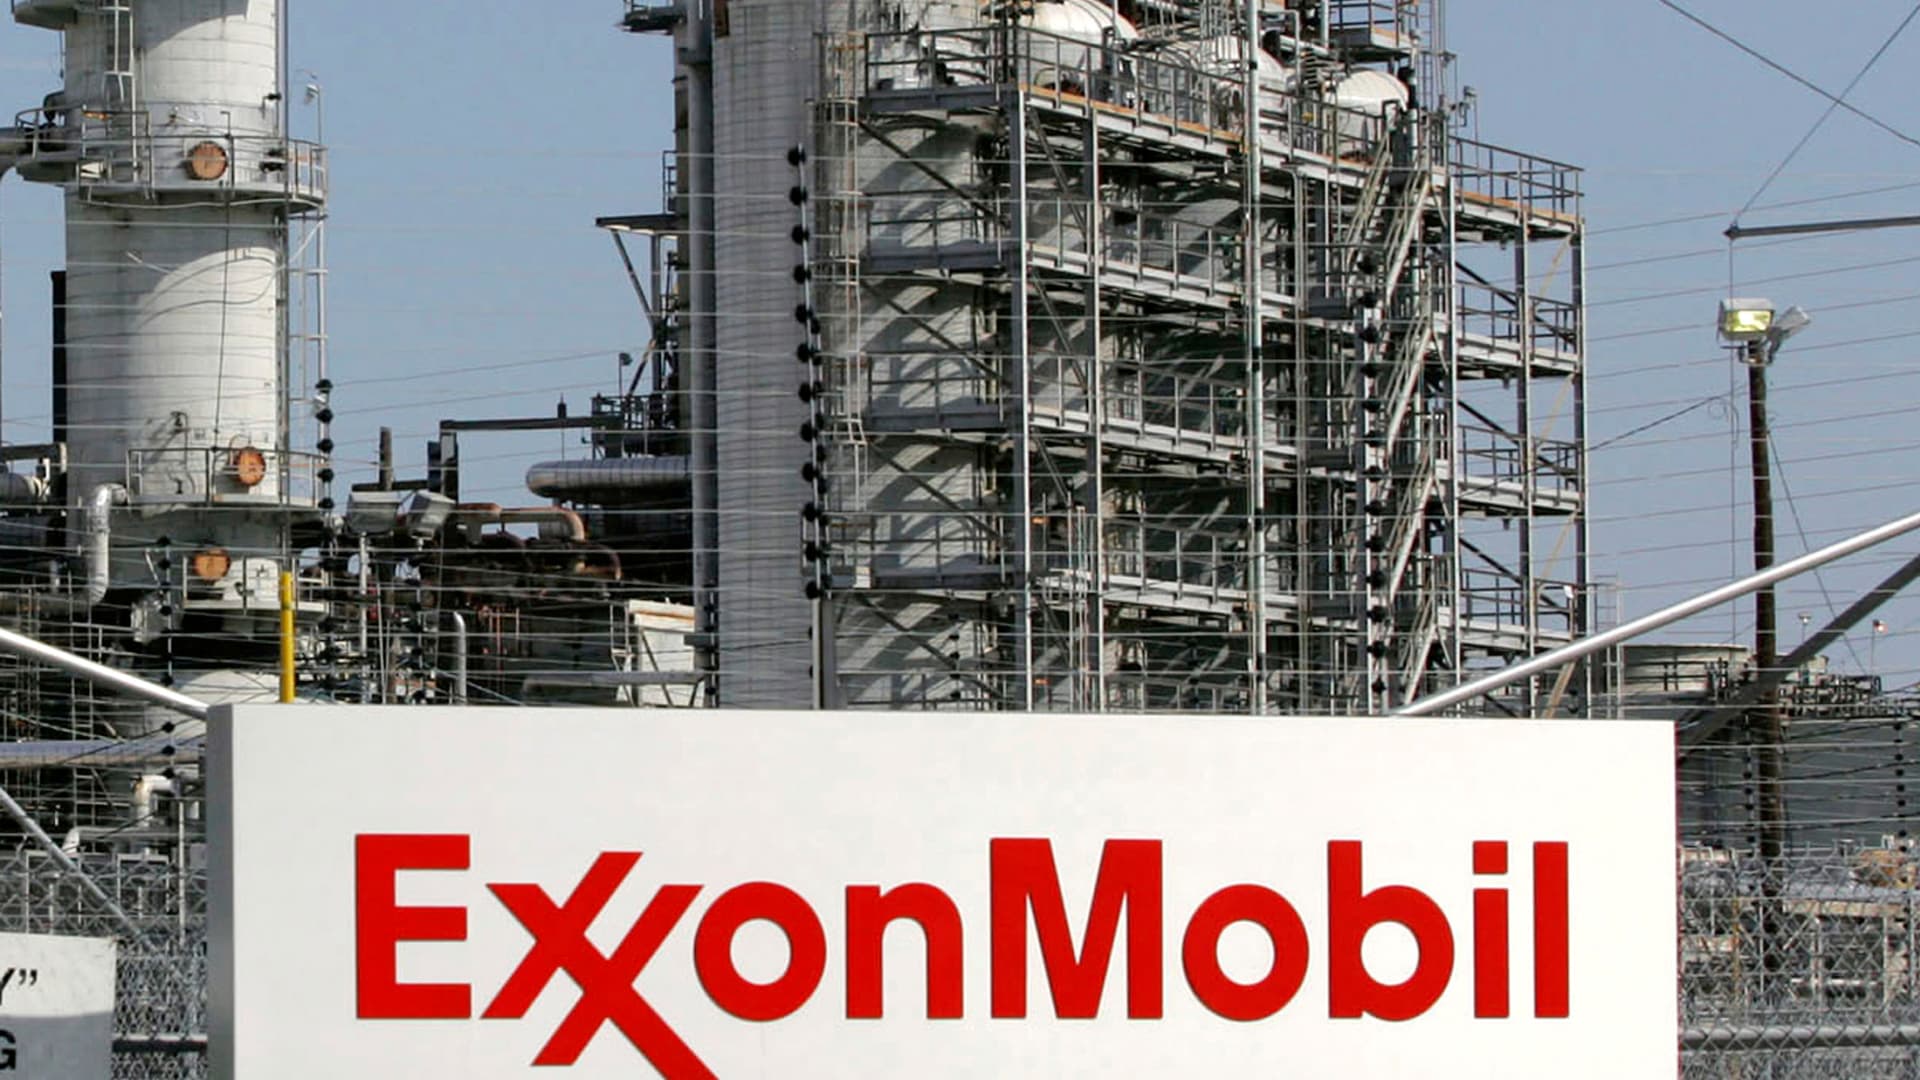 Exxon Mobil reaches settlement with FTC, poised to shut $60 billion Pioneer deal